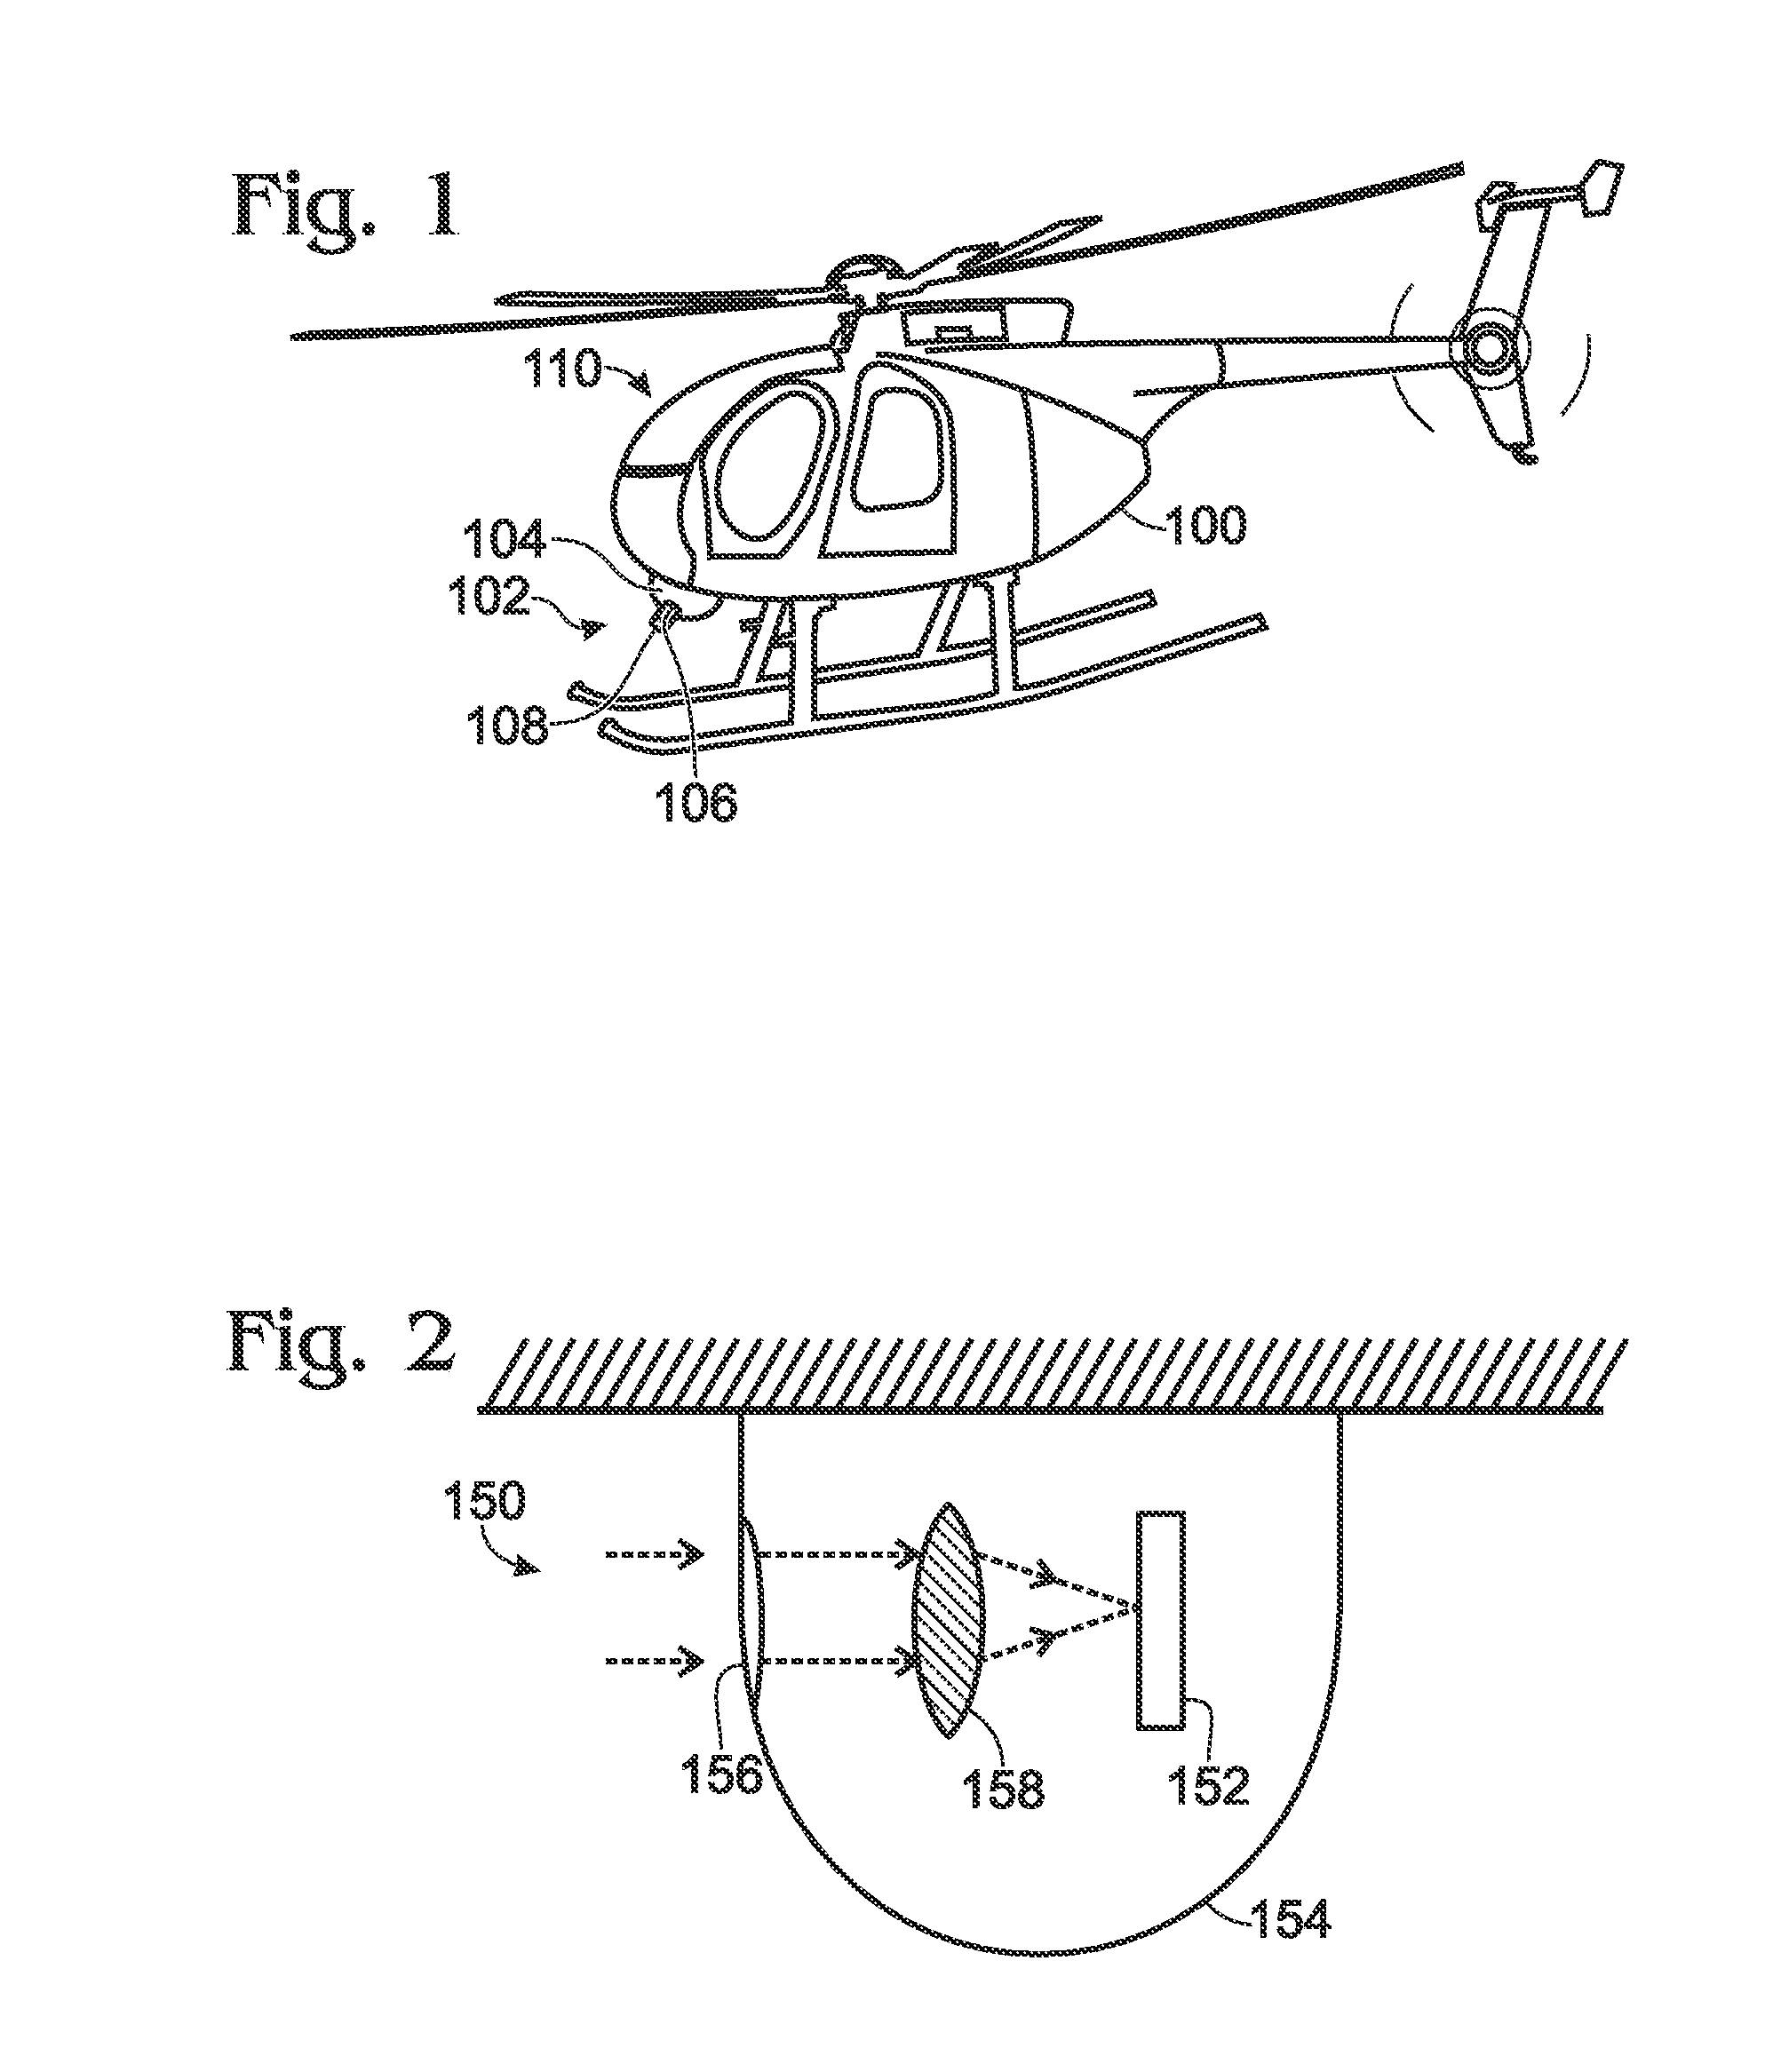 Electromagnetic interference shield